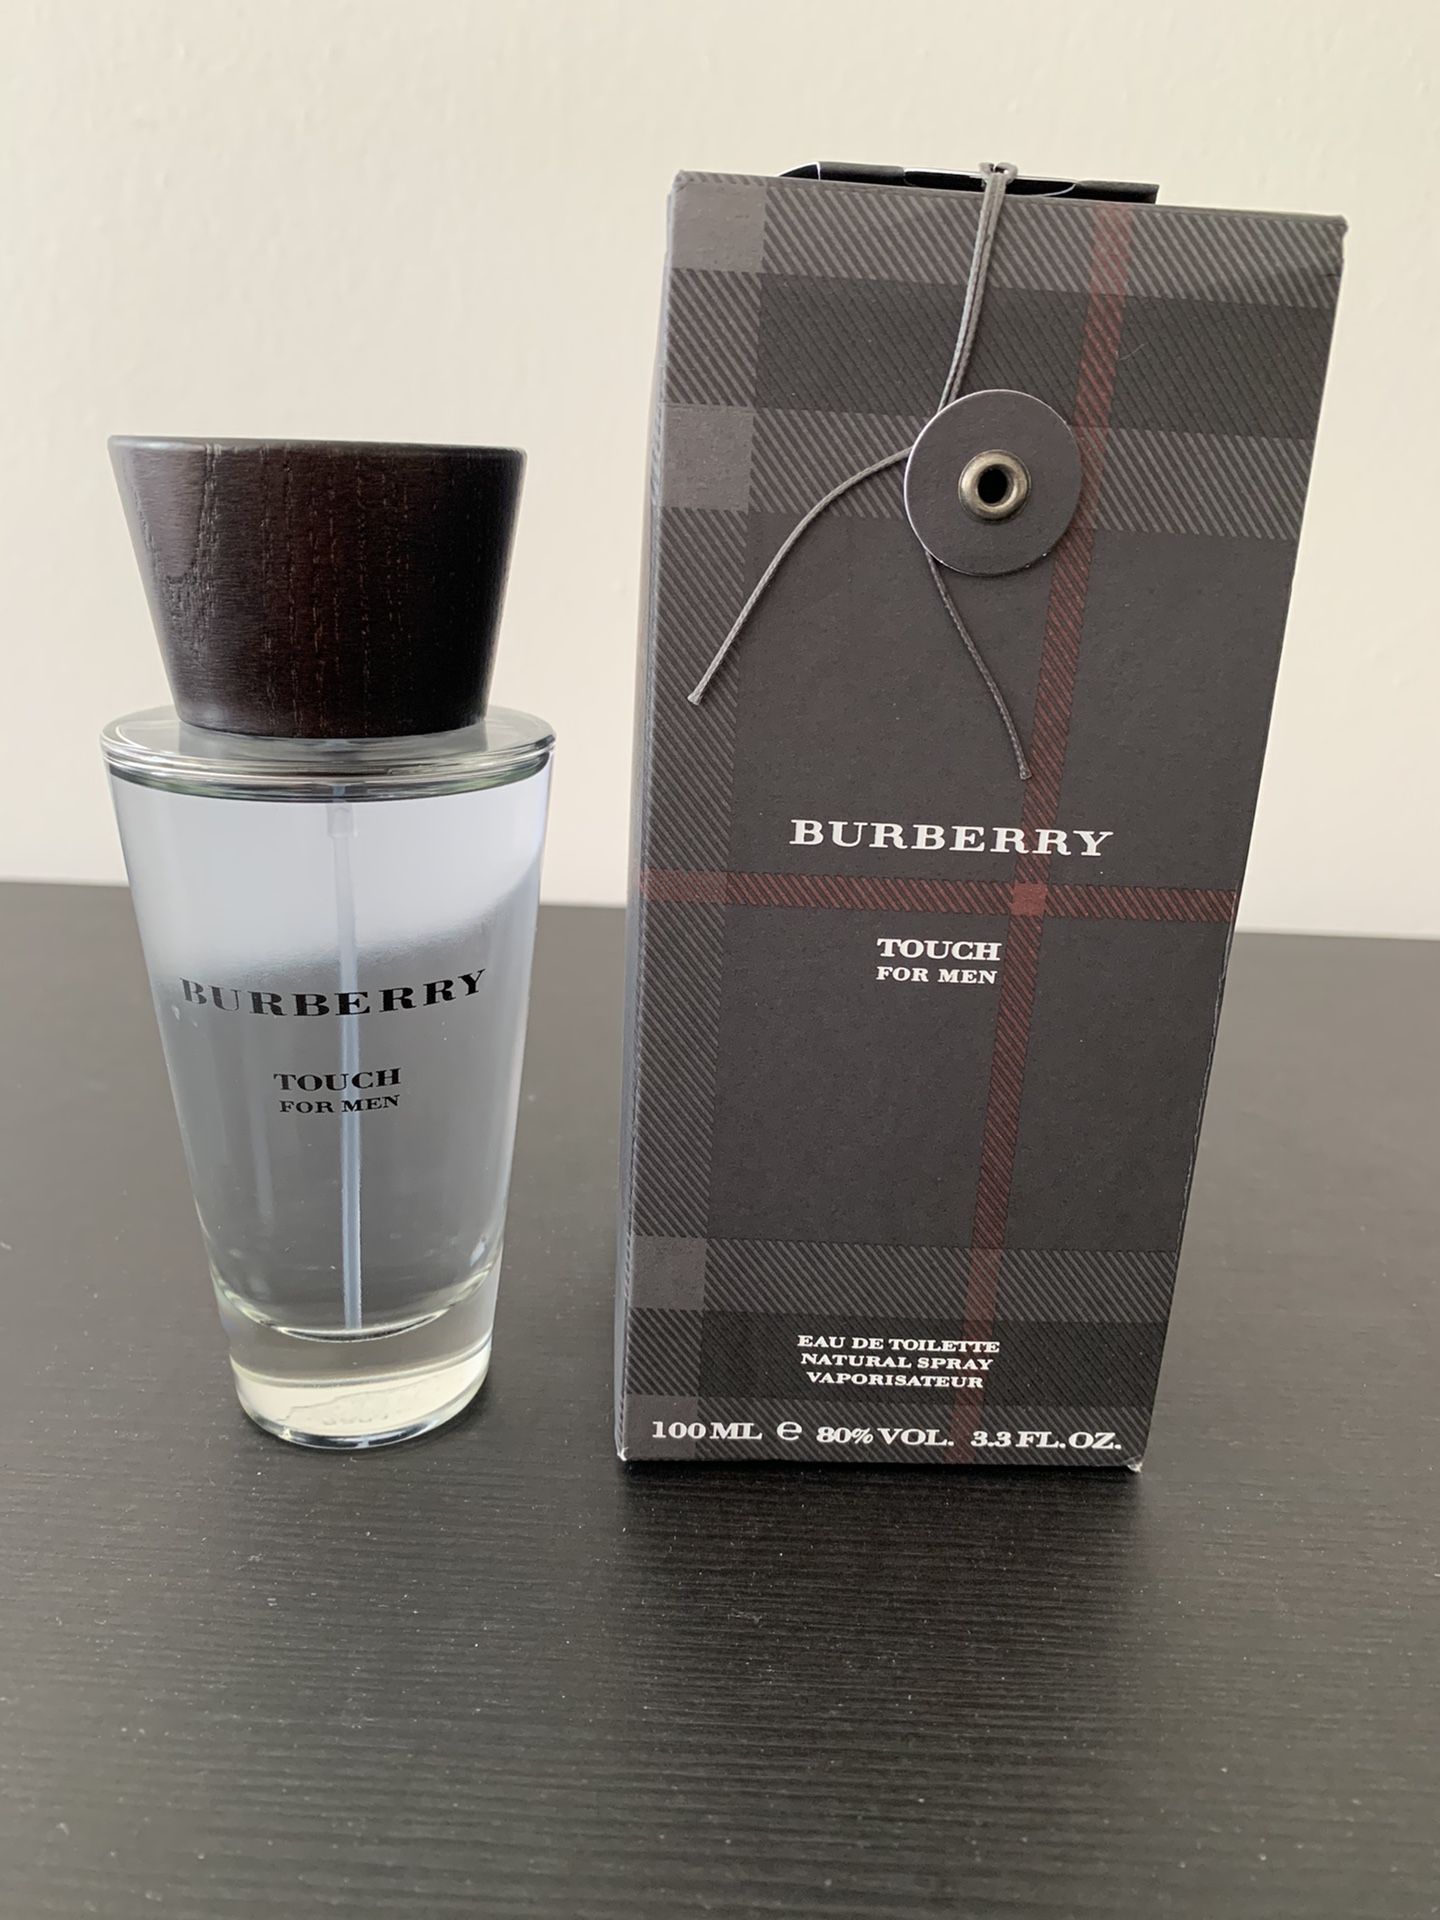 Stewart ø Ugle Perle Brand New Authentic Burberry Men's Cologne for Sale in Queens, NY - OfferUp